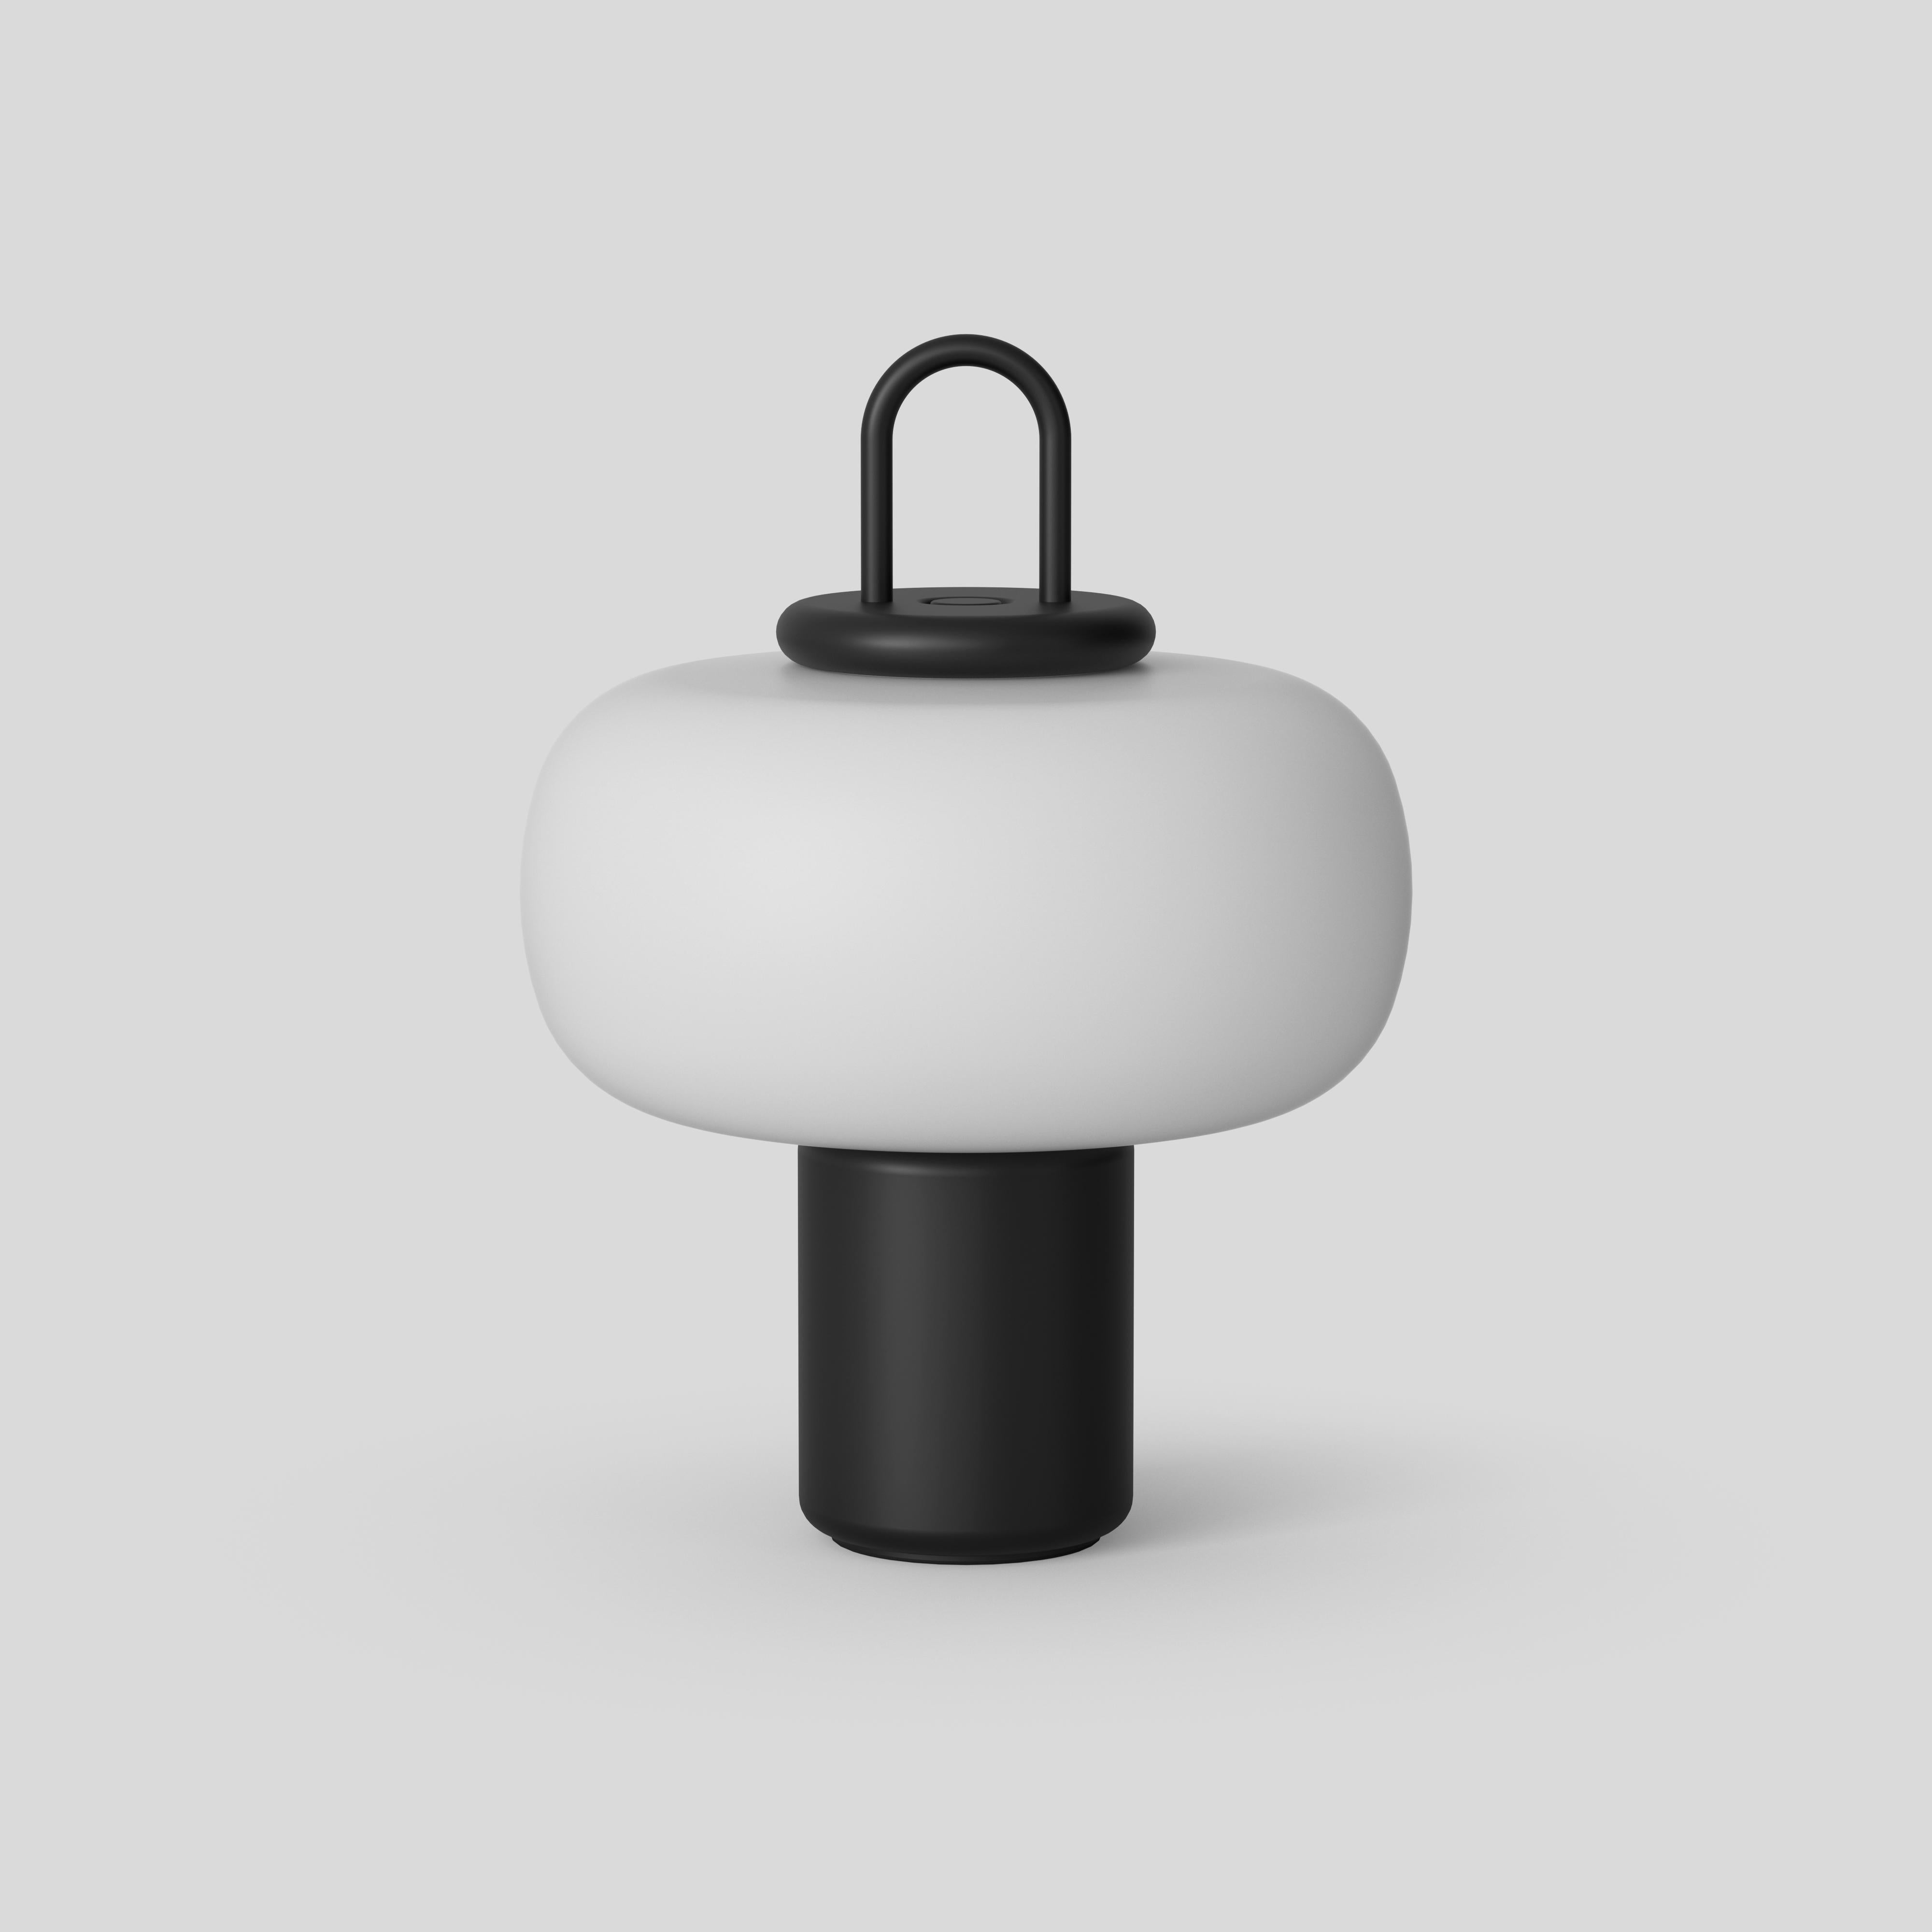 Nox
Design by Alfredo Häberli
Distinctive to Nox is its wireless charging system with induction technology, enabling this sophisticated and highly versatile lamp to be used unplugged. The Luminaire is composed of four elements: a charging base, an